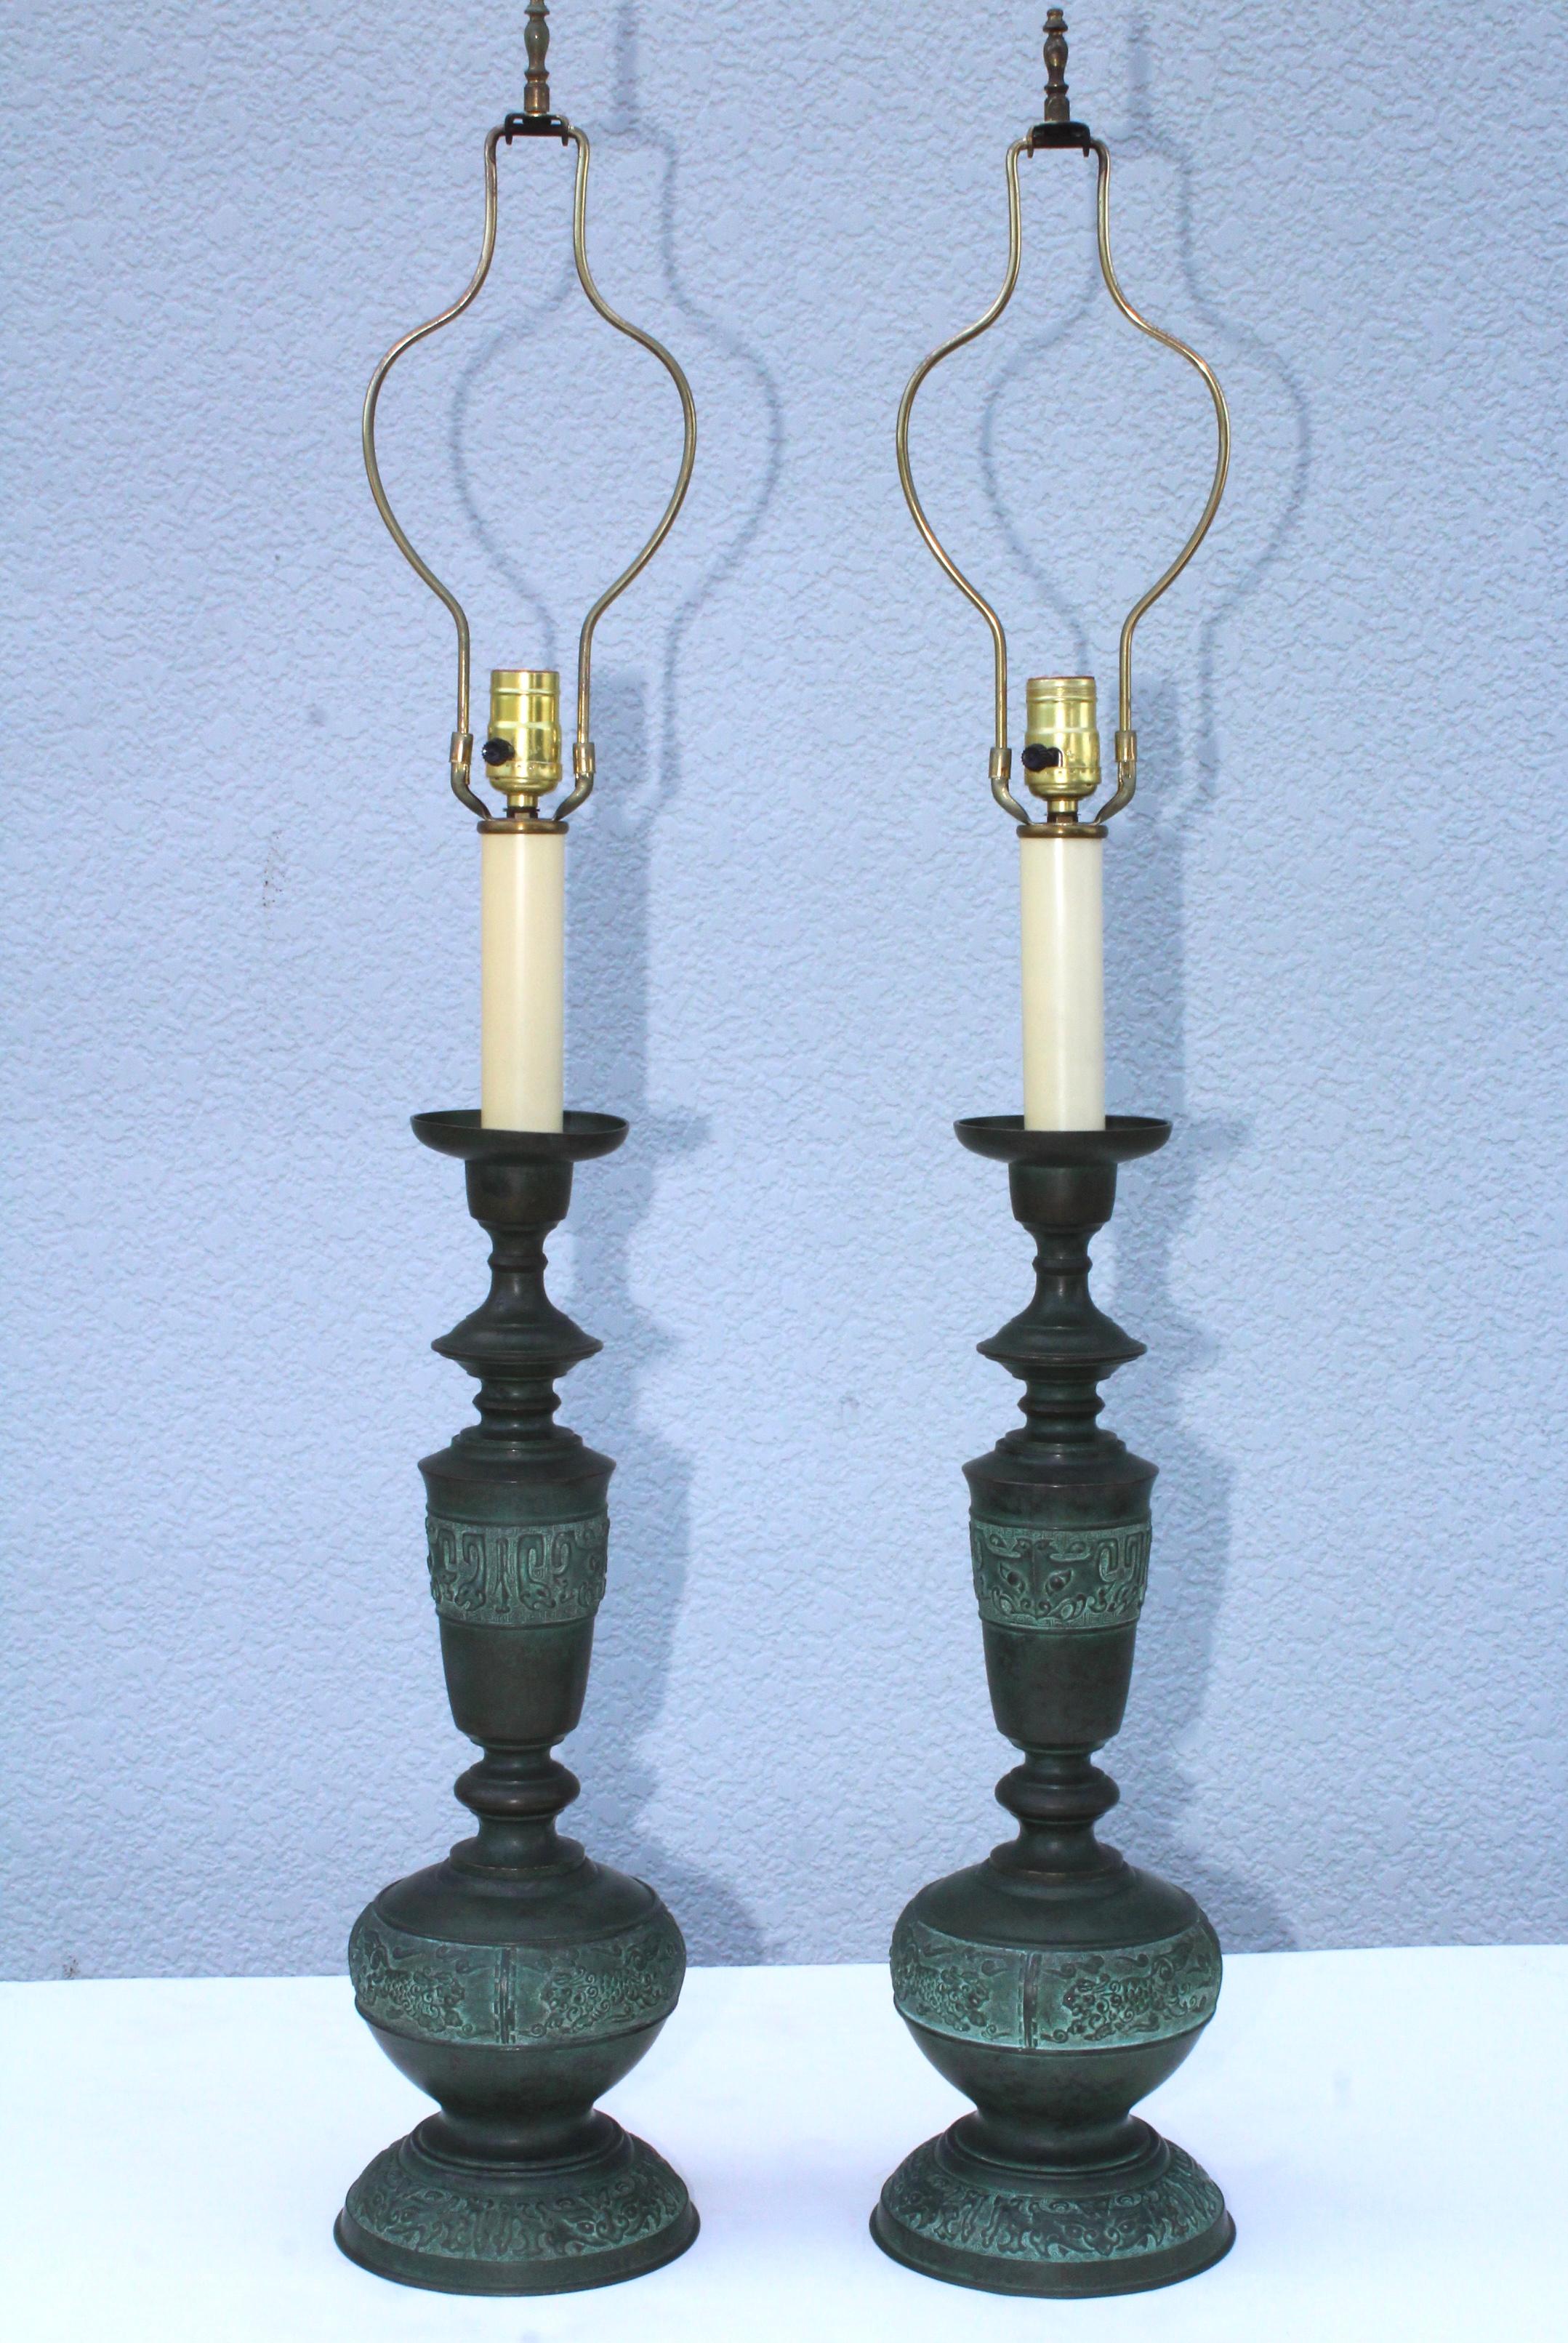 1950s James Mont style bronze Japanese table lamps.